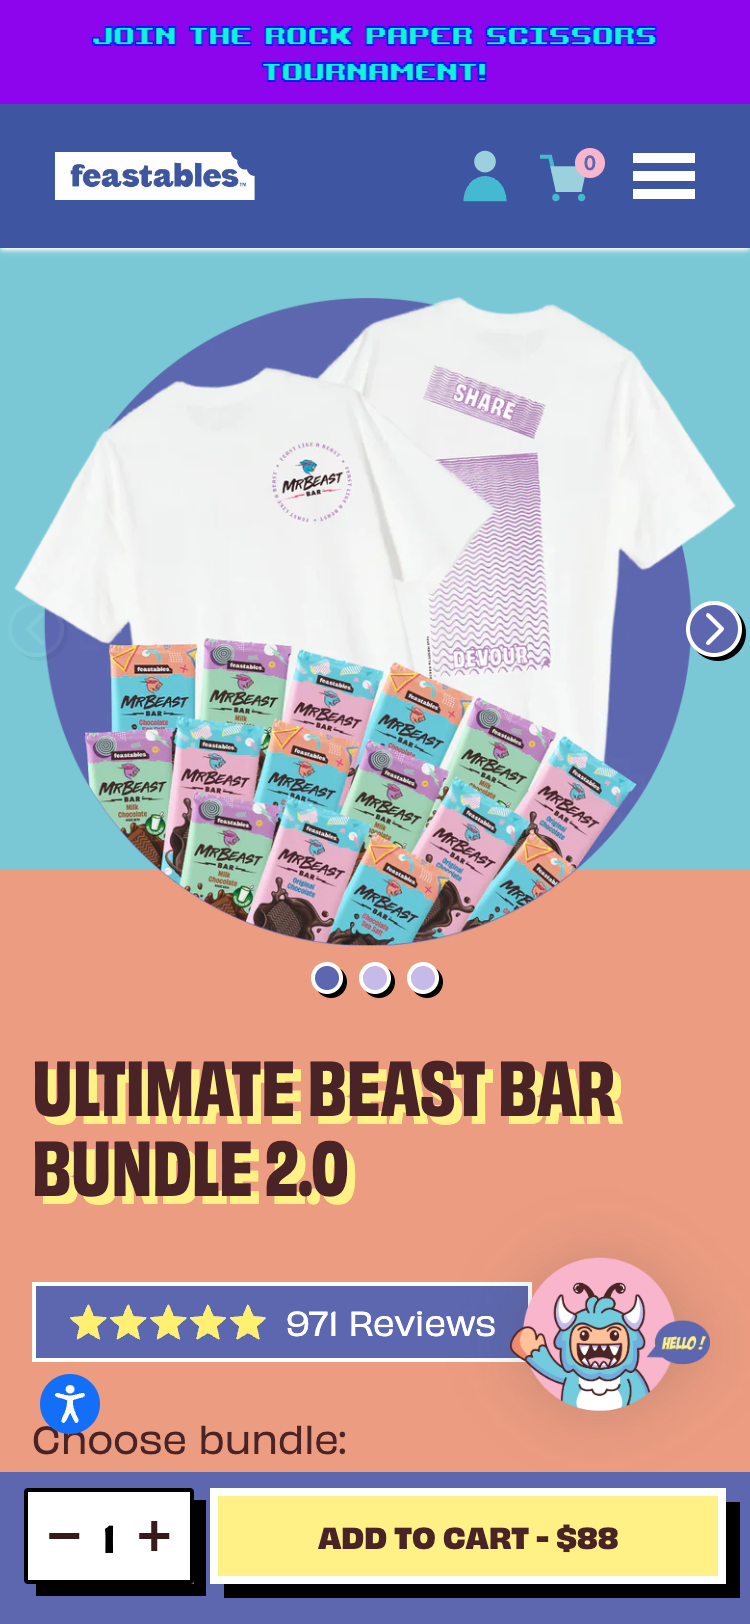 Mobile screenshot of the 'Ultimate Beast Bar Bundle 2.0' product page of the Feastables website. There is a photograph of the product, and below it is a product description and an 'Add to cart' button.